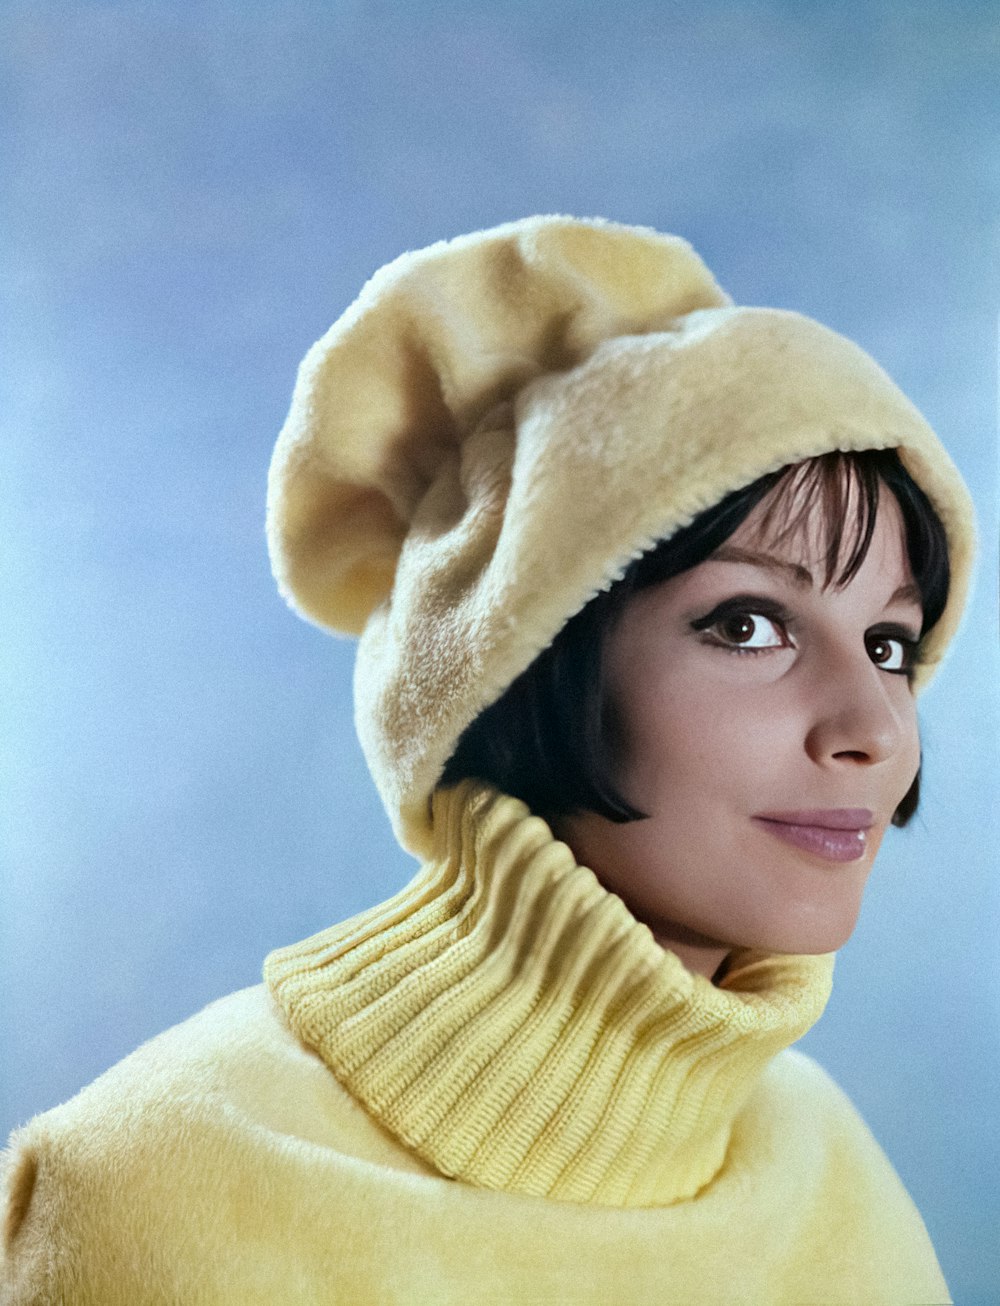 a woman wearing a yellow sweater and a hat